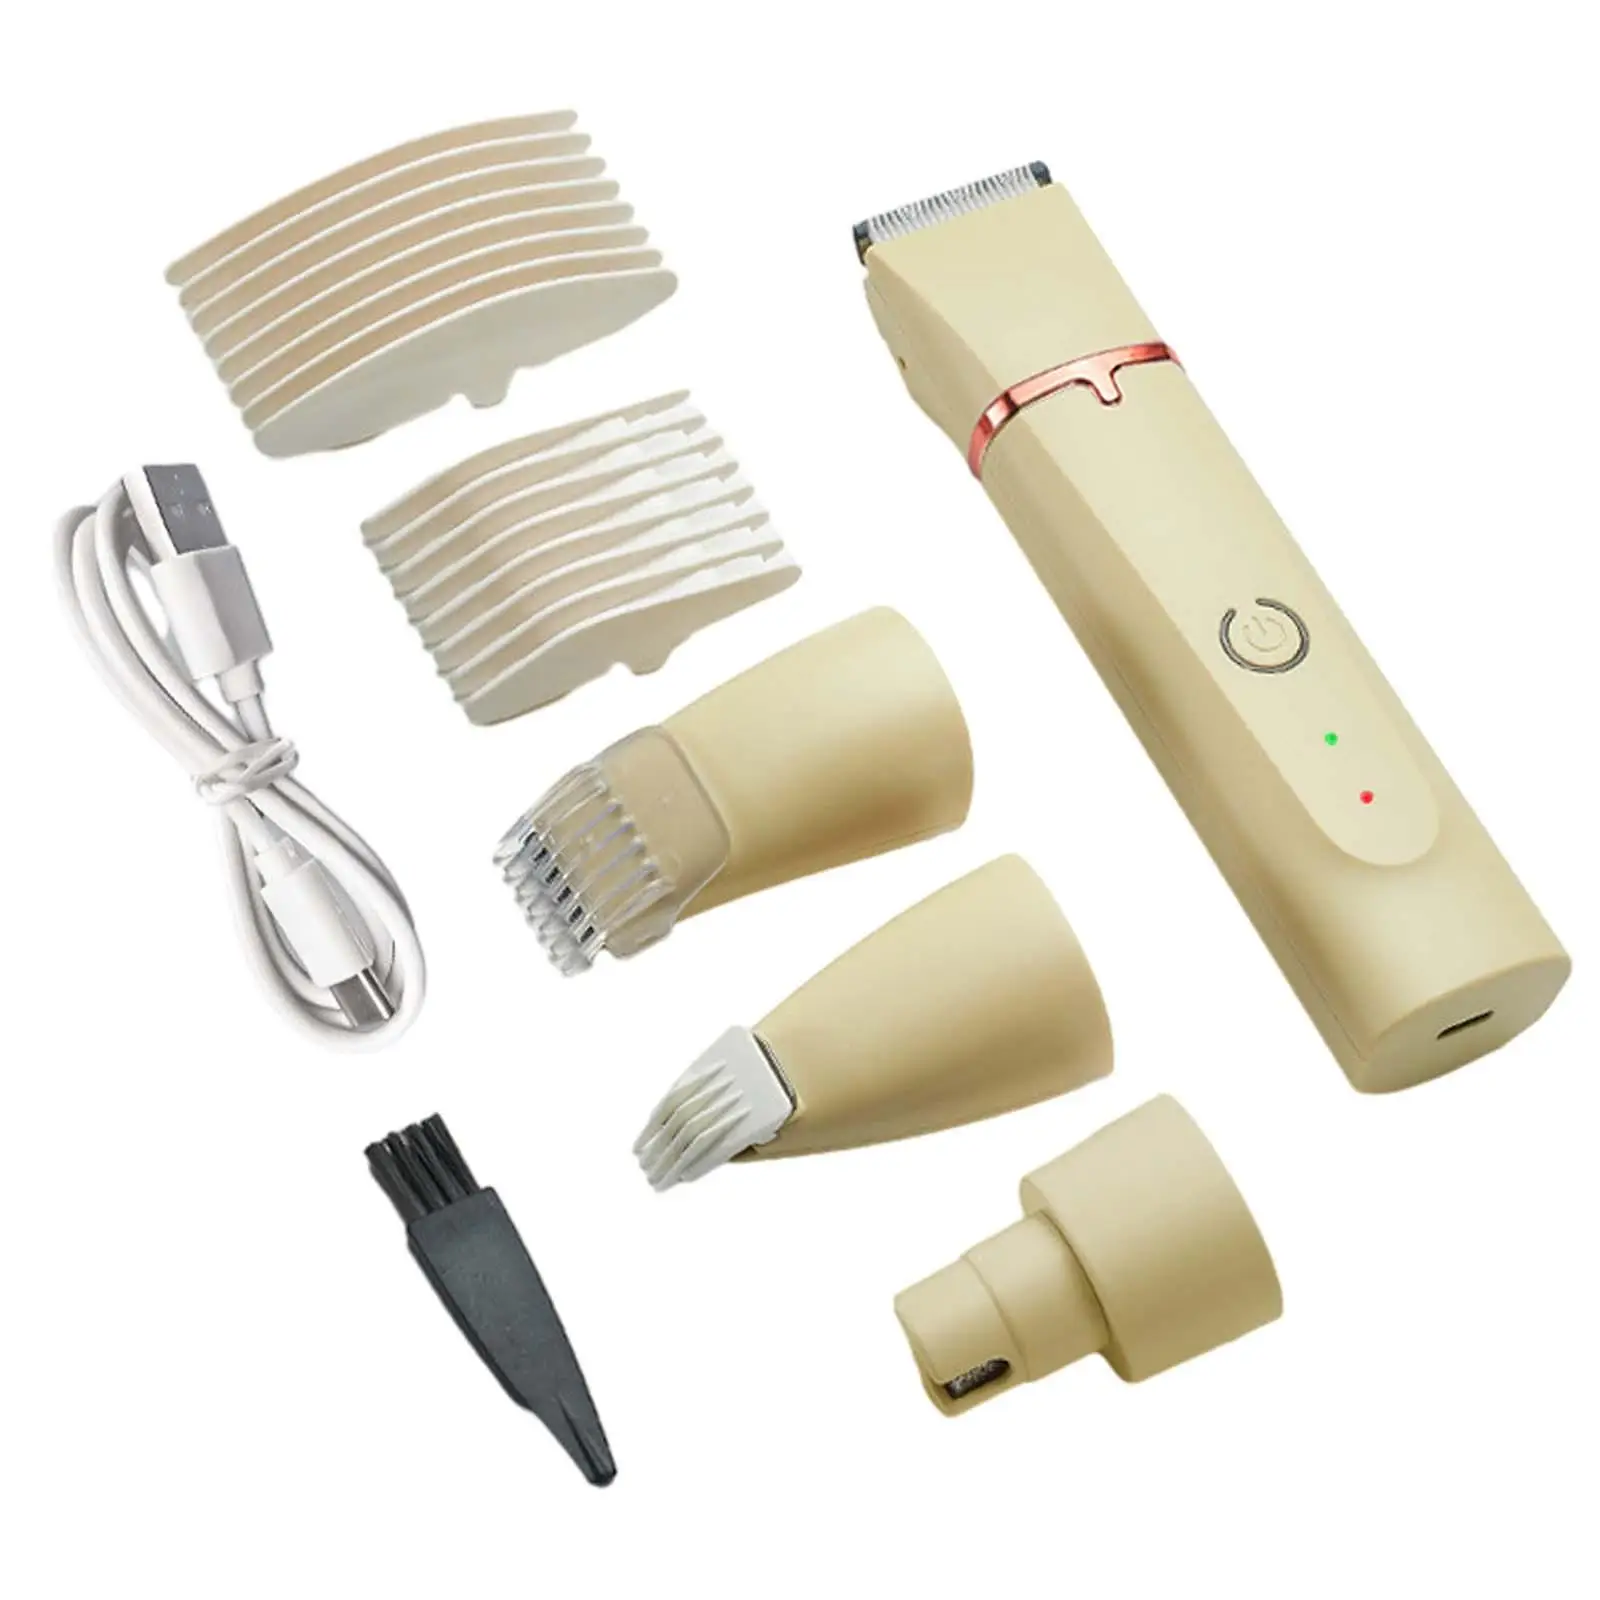 Dog Clipper Low Noise Cordless Portable Grinder for Rump Paws Ears